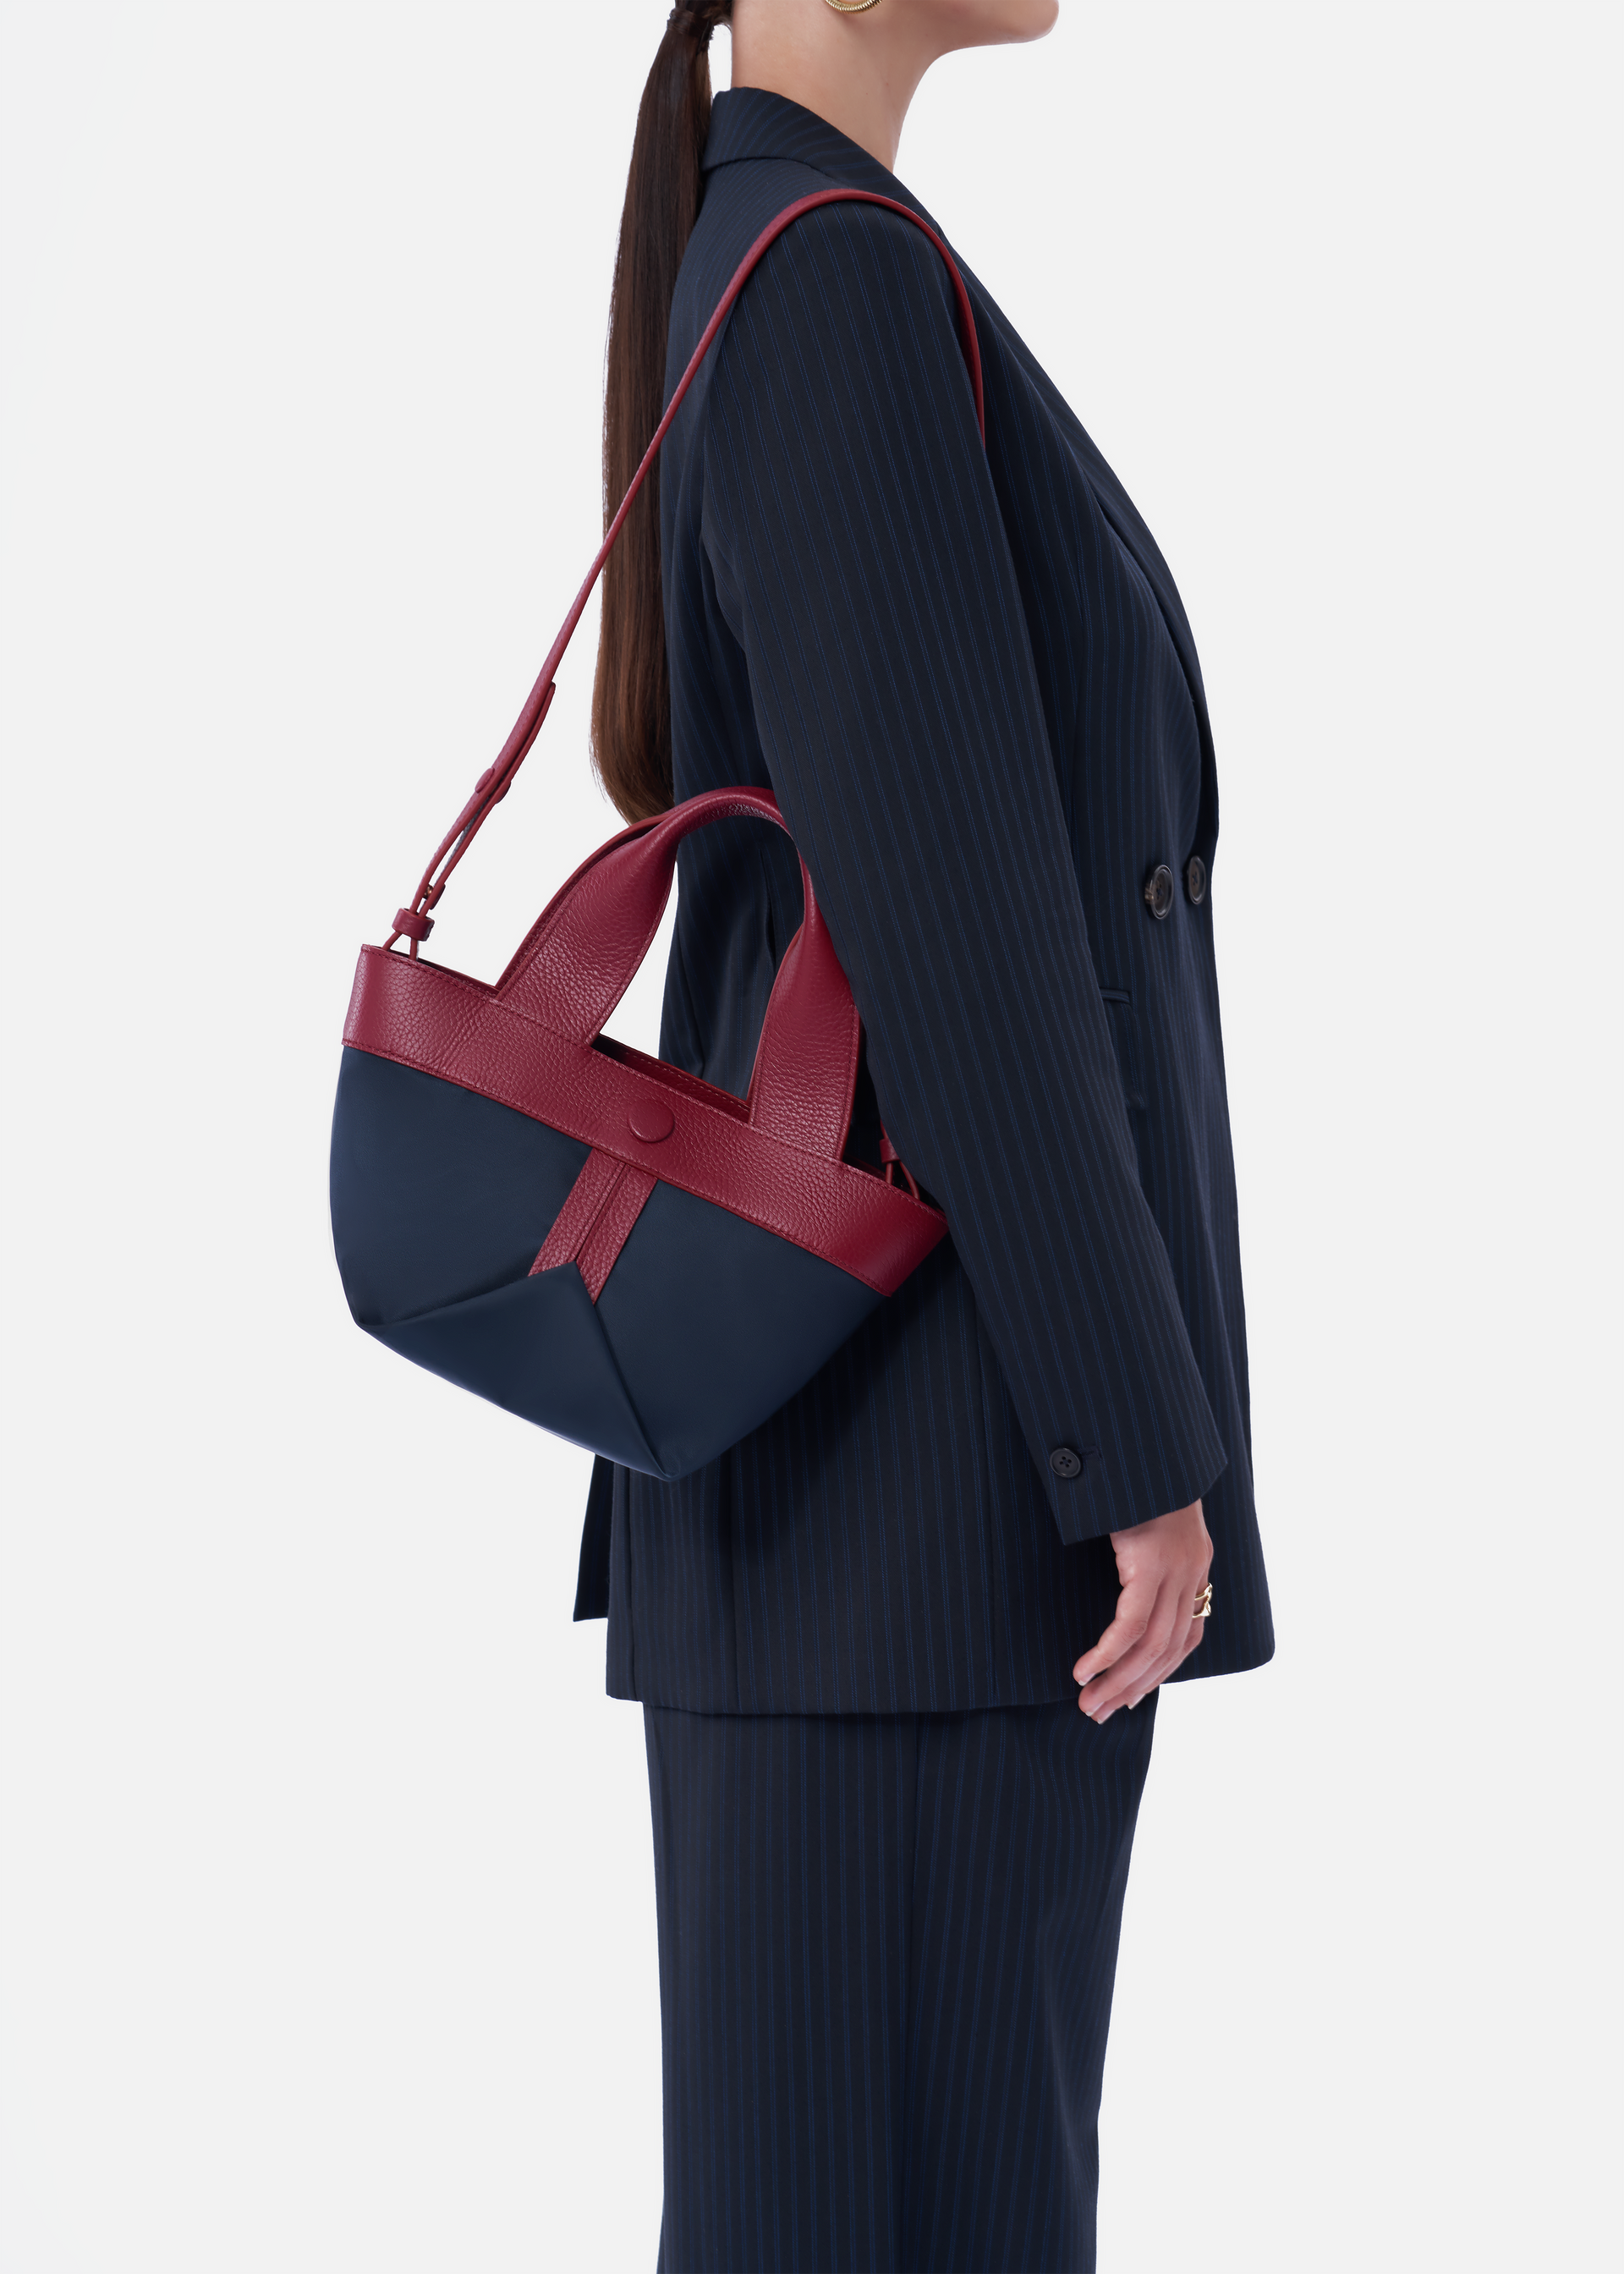 Gusset small nylon tote with pebble leather trim in navy / burgundy